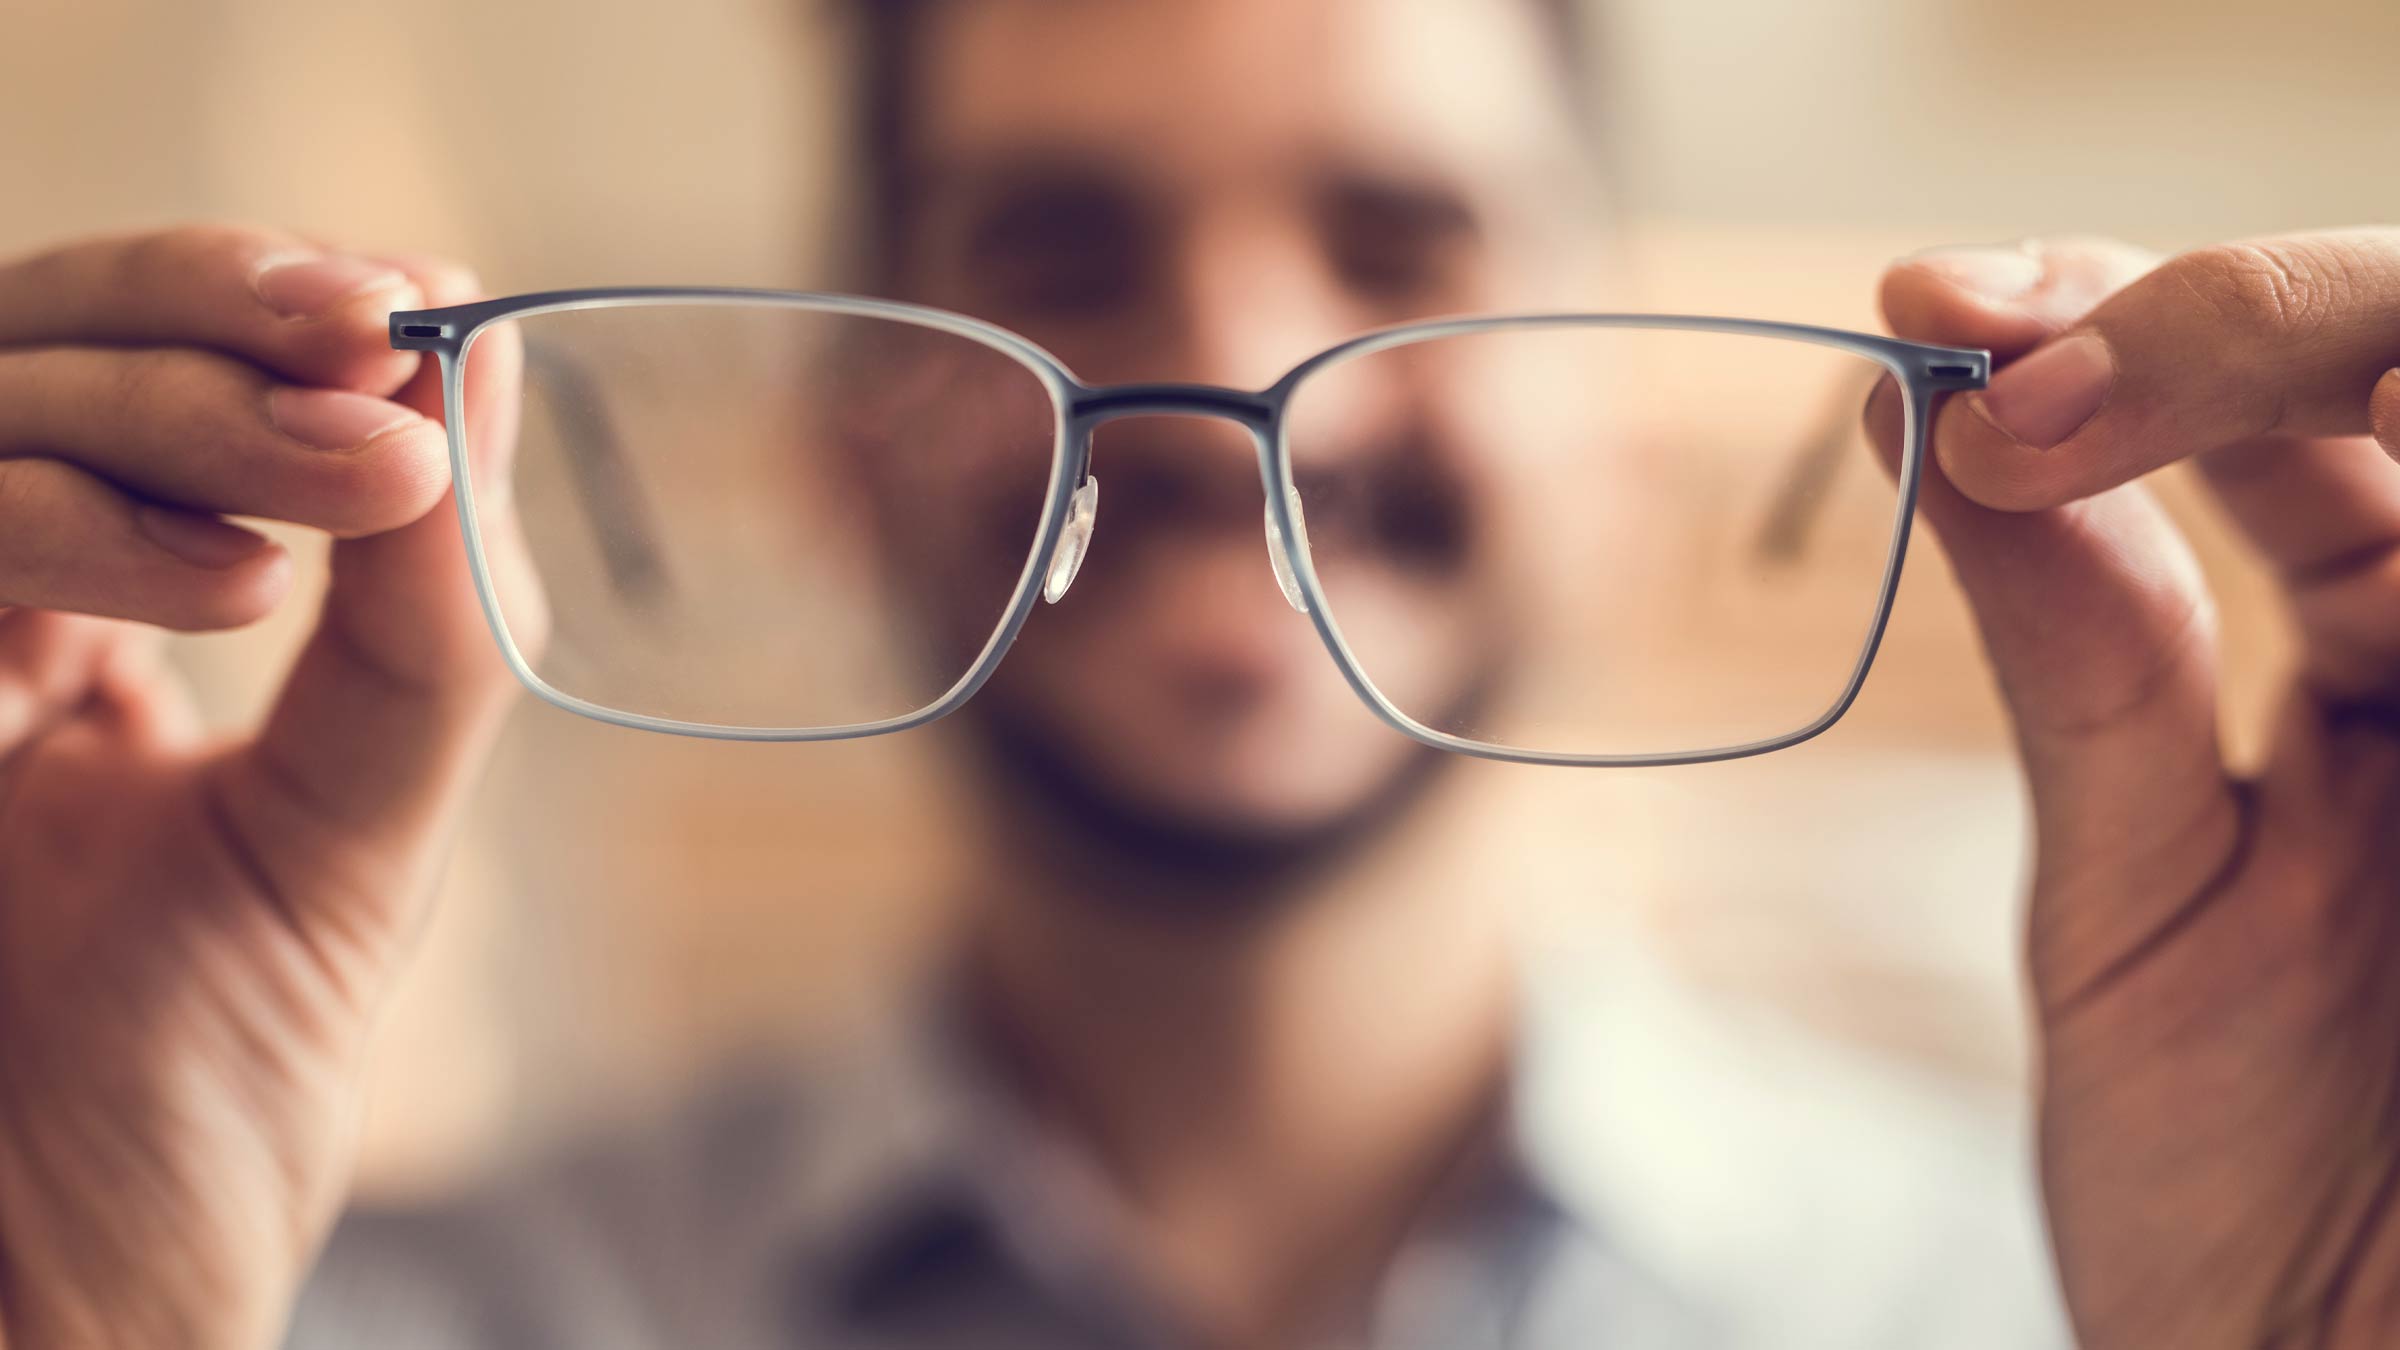 Close up of a man getting ready to try on glasses